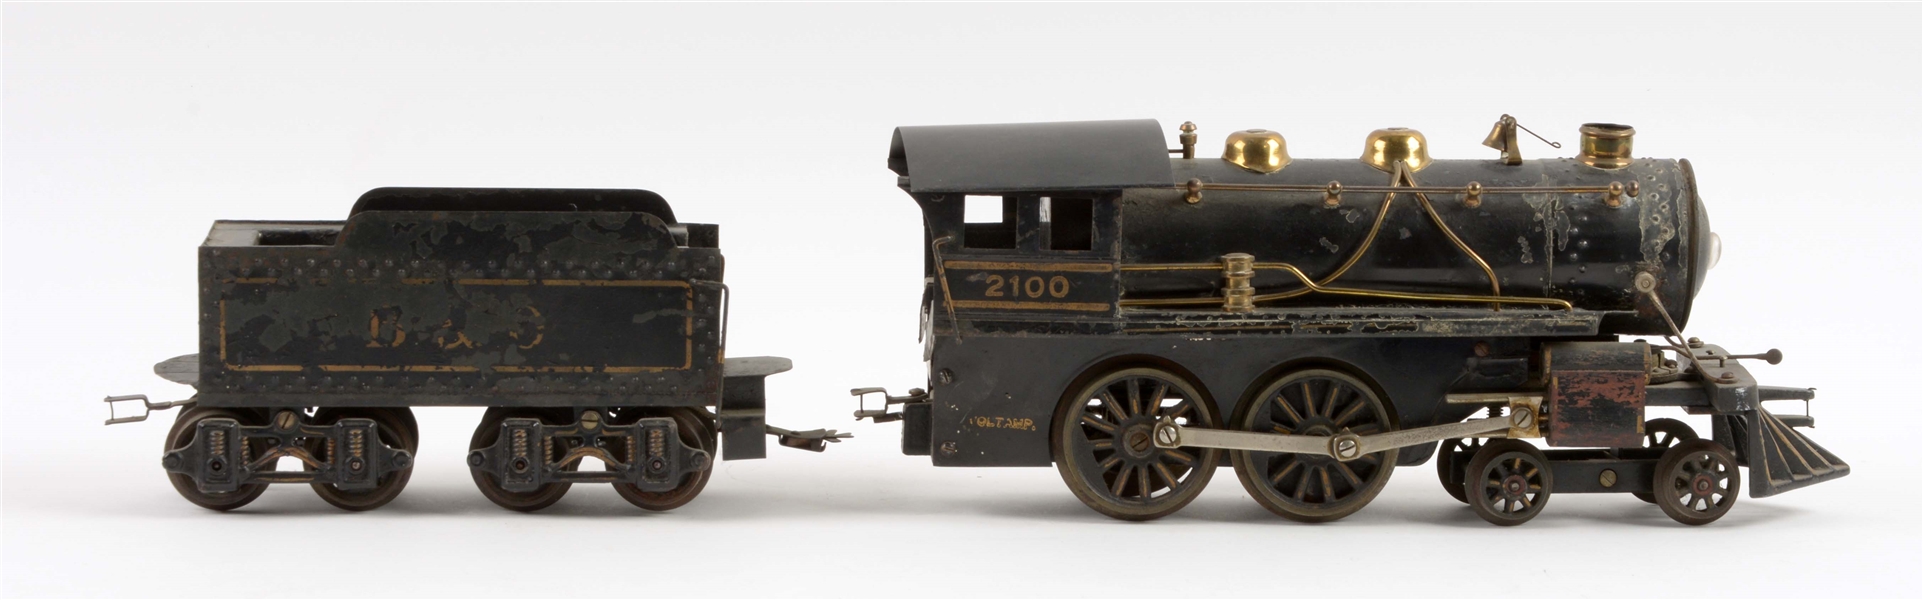 LOT OF 2: VOLTAMP NO. 2100 ENGINE WITH B&O TENDER. 